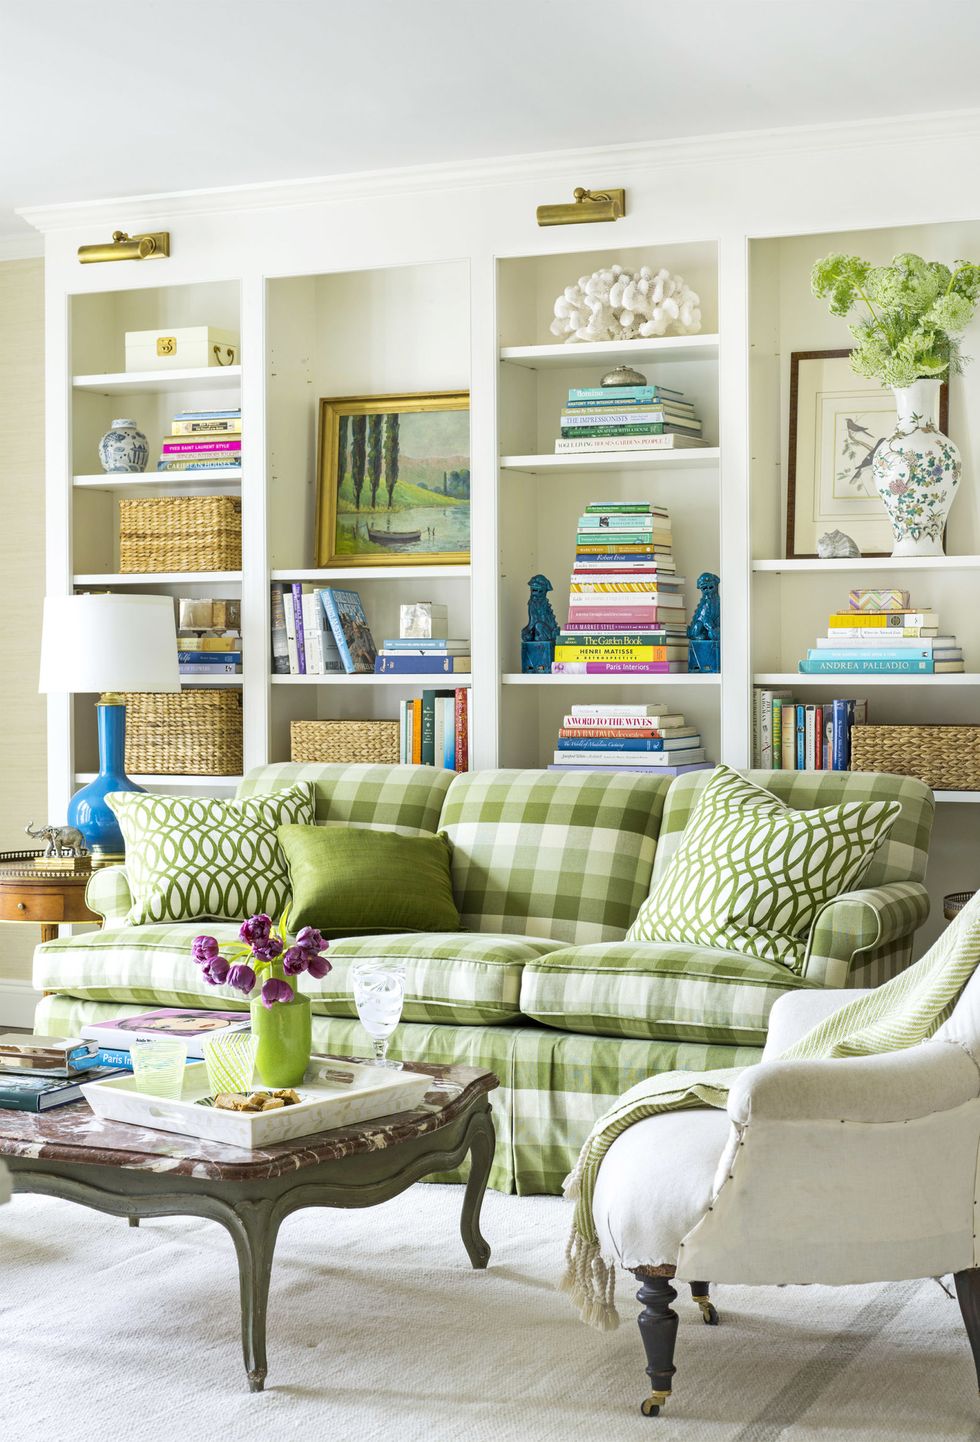 Living room, Furniture, Room, Interior design, Couch, Green, Yellow, Blue, Home, Turquoise, 